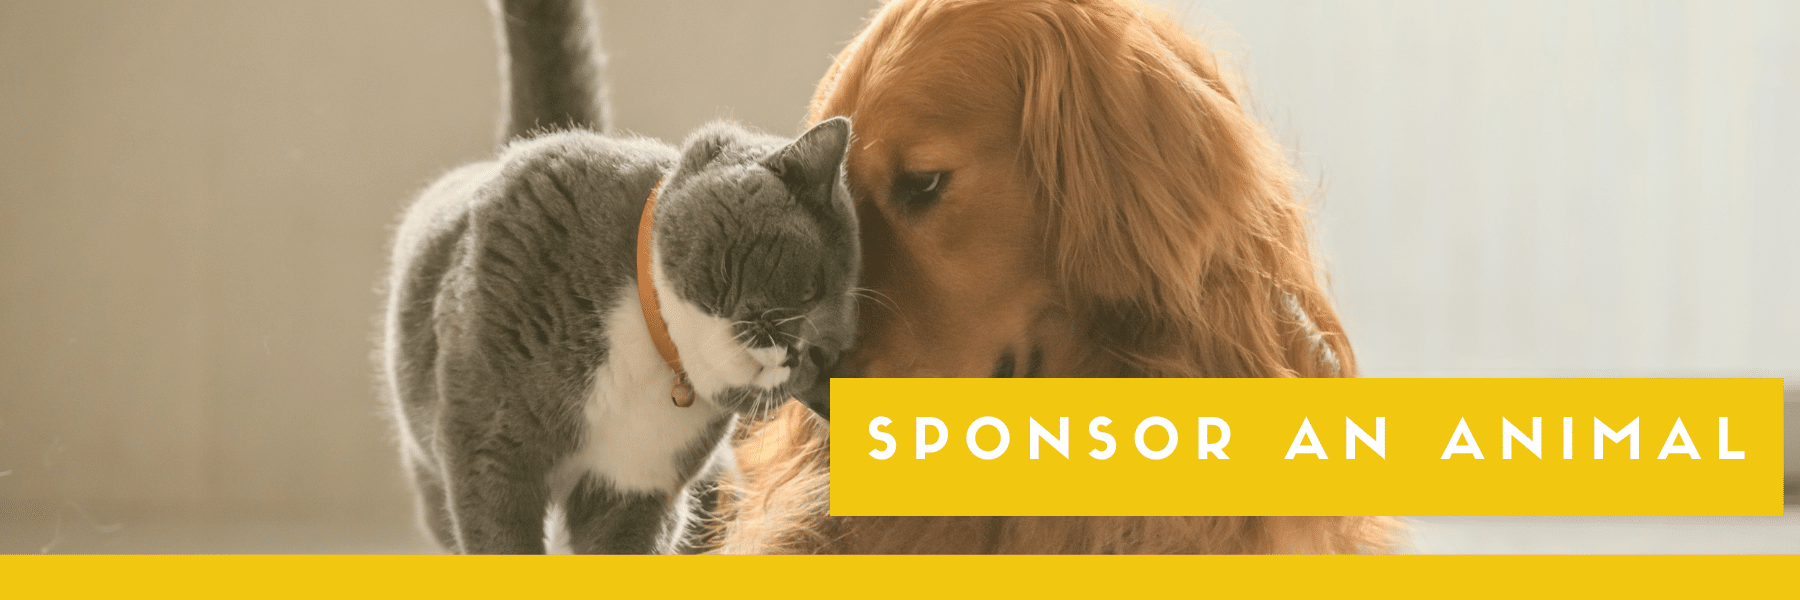 Sponsor an Animal – West Valley Humane Society